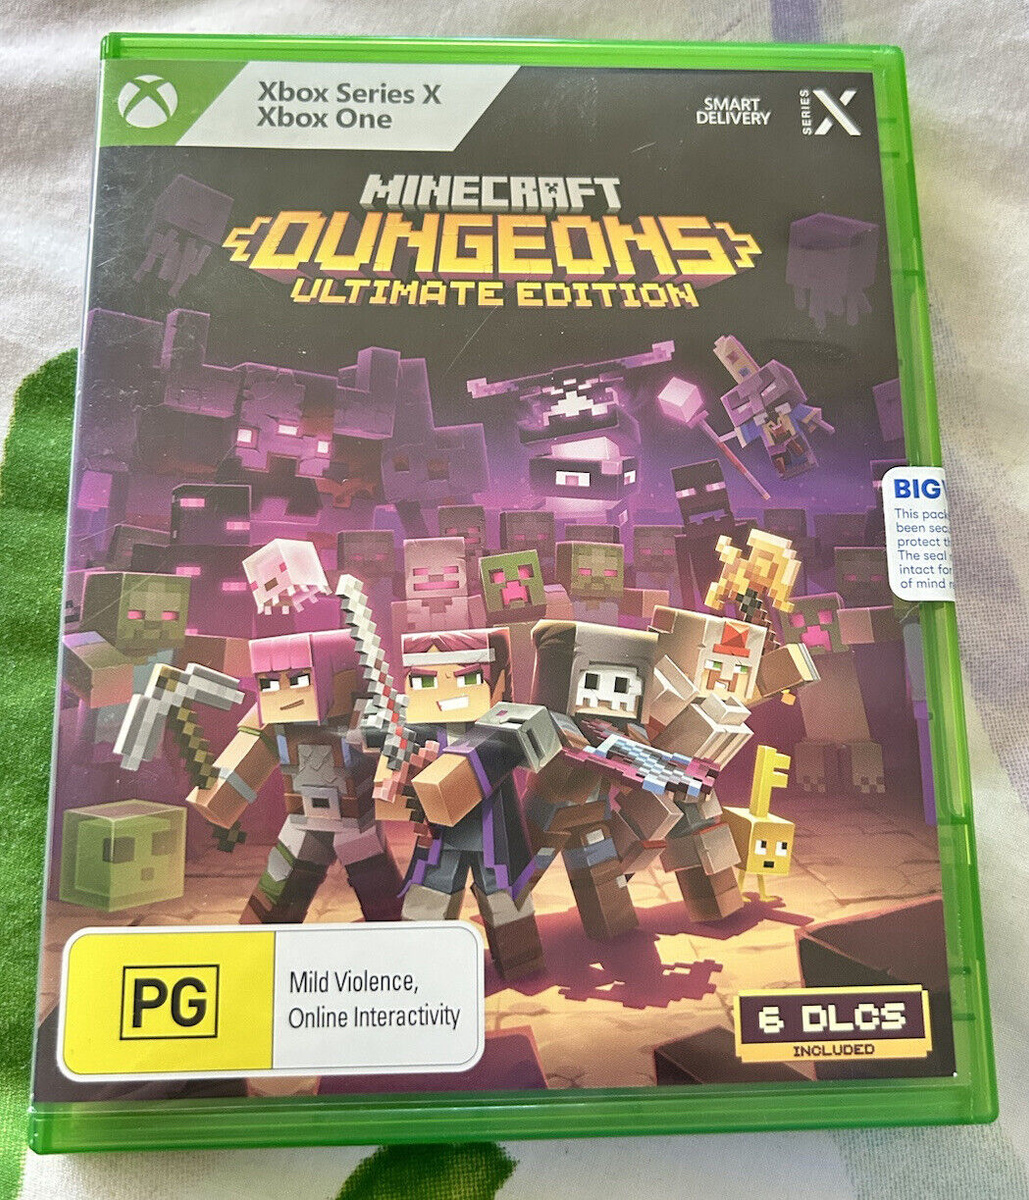 Edition Dungeons NEW One X Minecraft Series BRAND Xbox Ultimate Xbox & Game